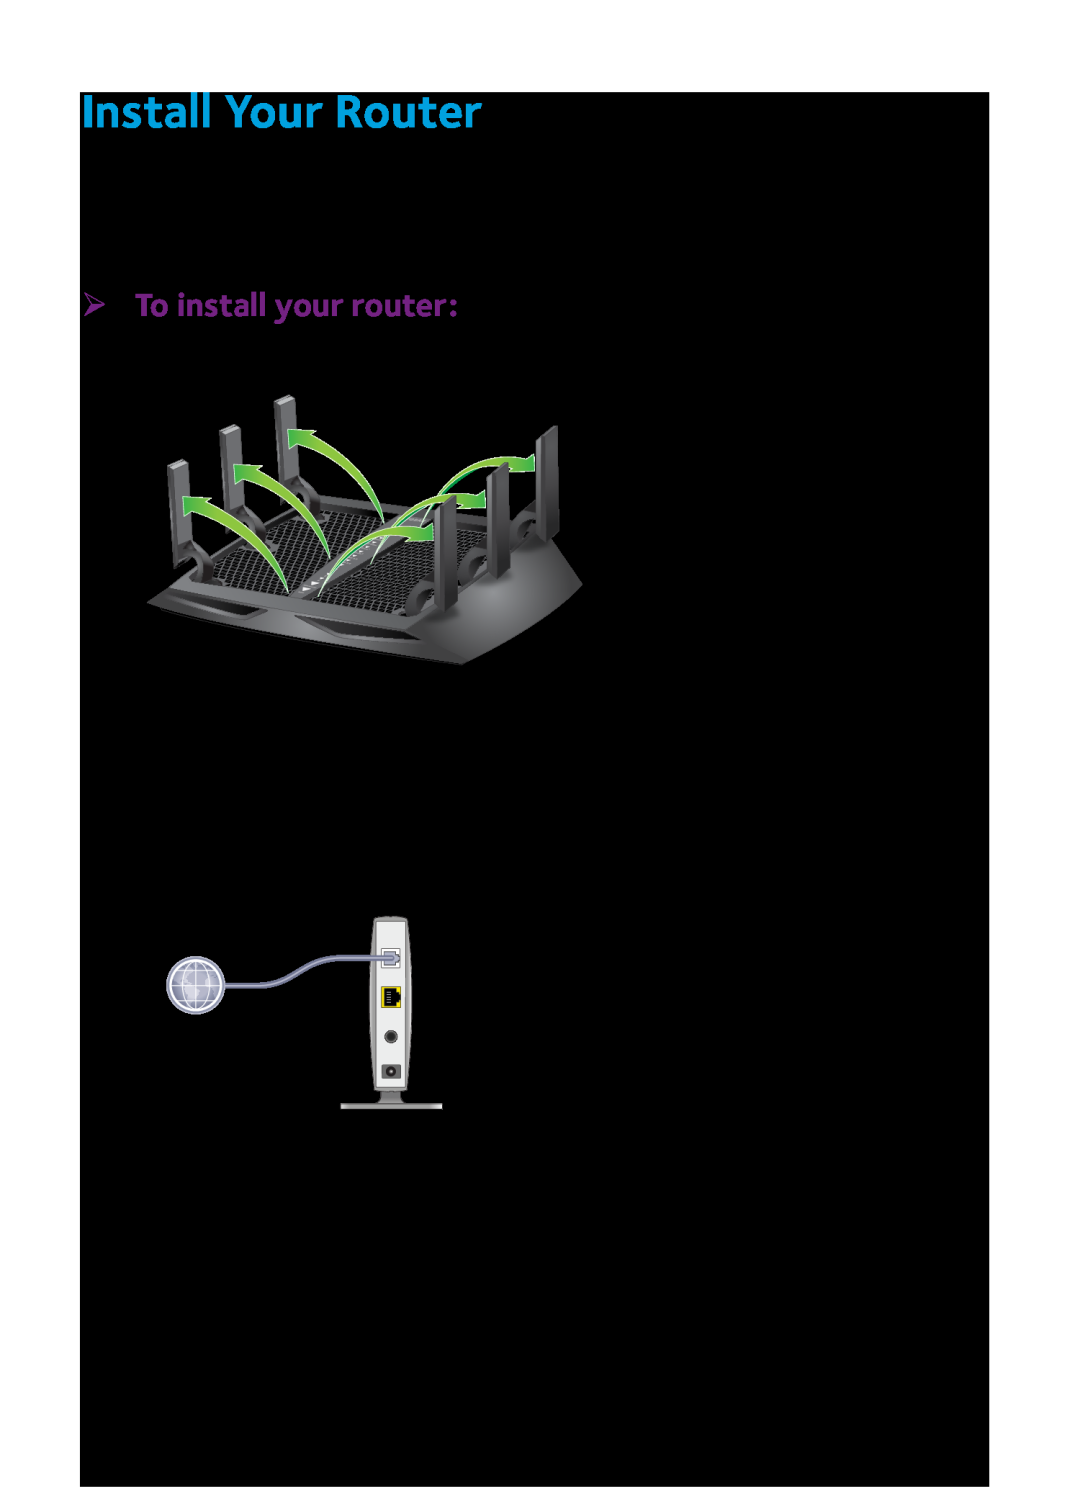 NETGEAR R8000 quick start Install Your Router, ¾¾ To install your router 